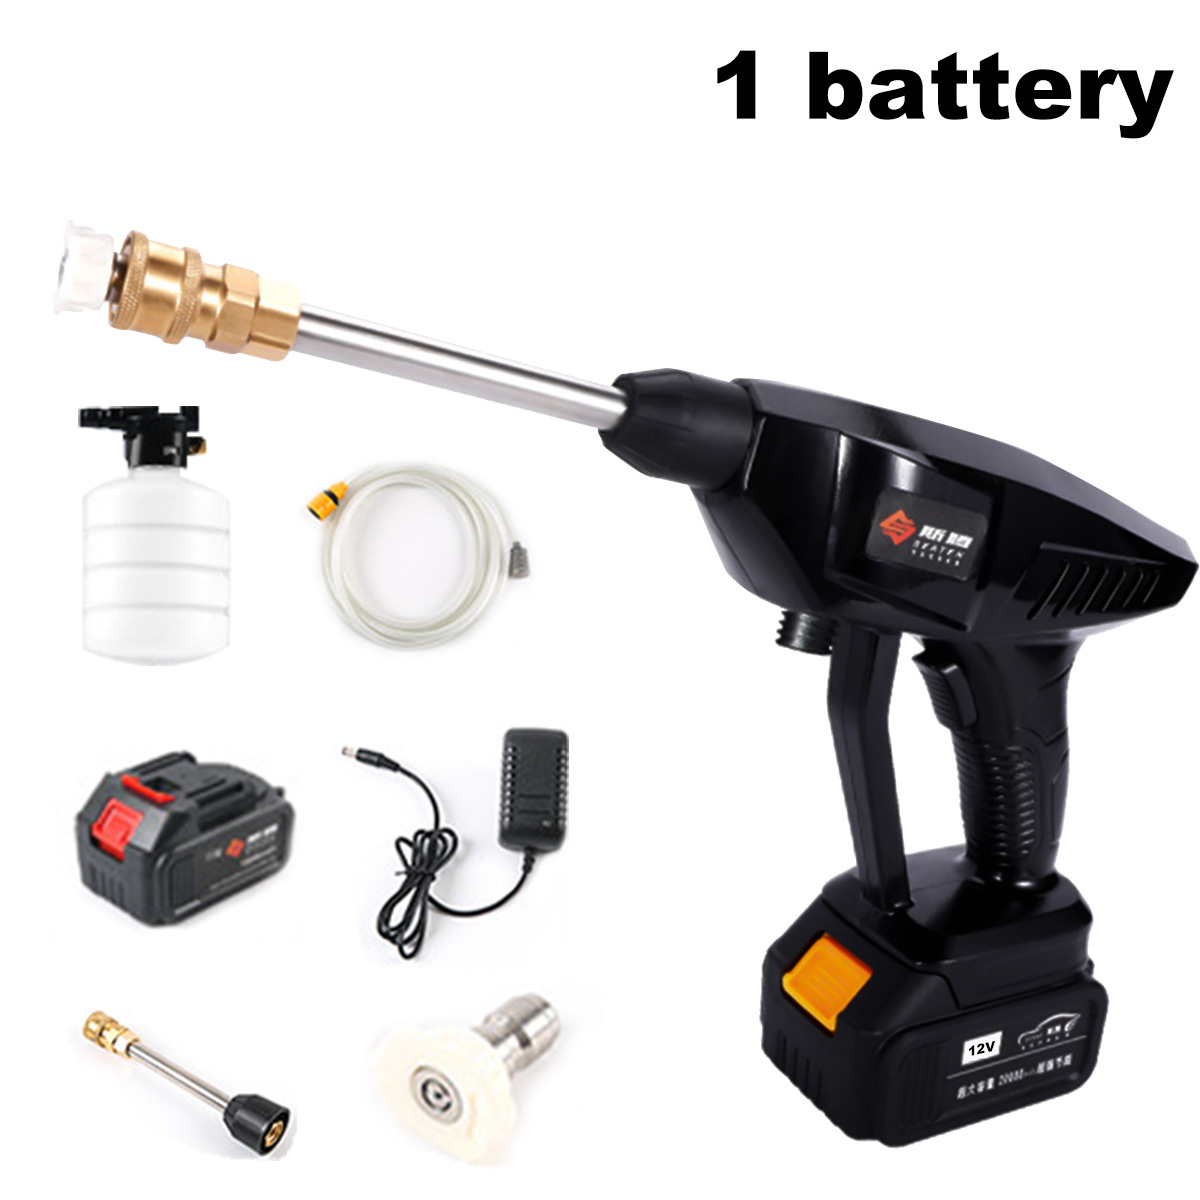 12V-15000mAh-Cordless-Electric-Pressure-Washer-Rechargeable-Car-Washing-Machine-Water-Spray-Guns-W-1-1830643-11